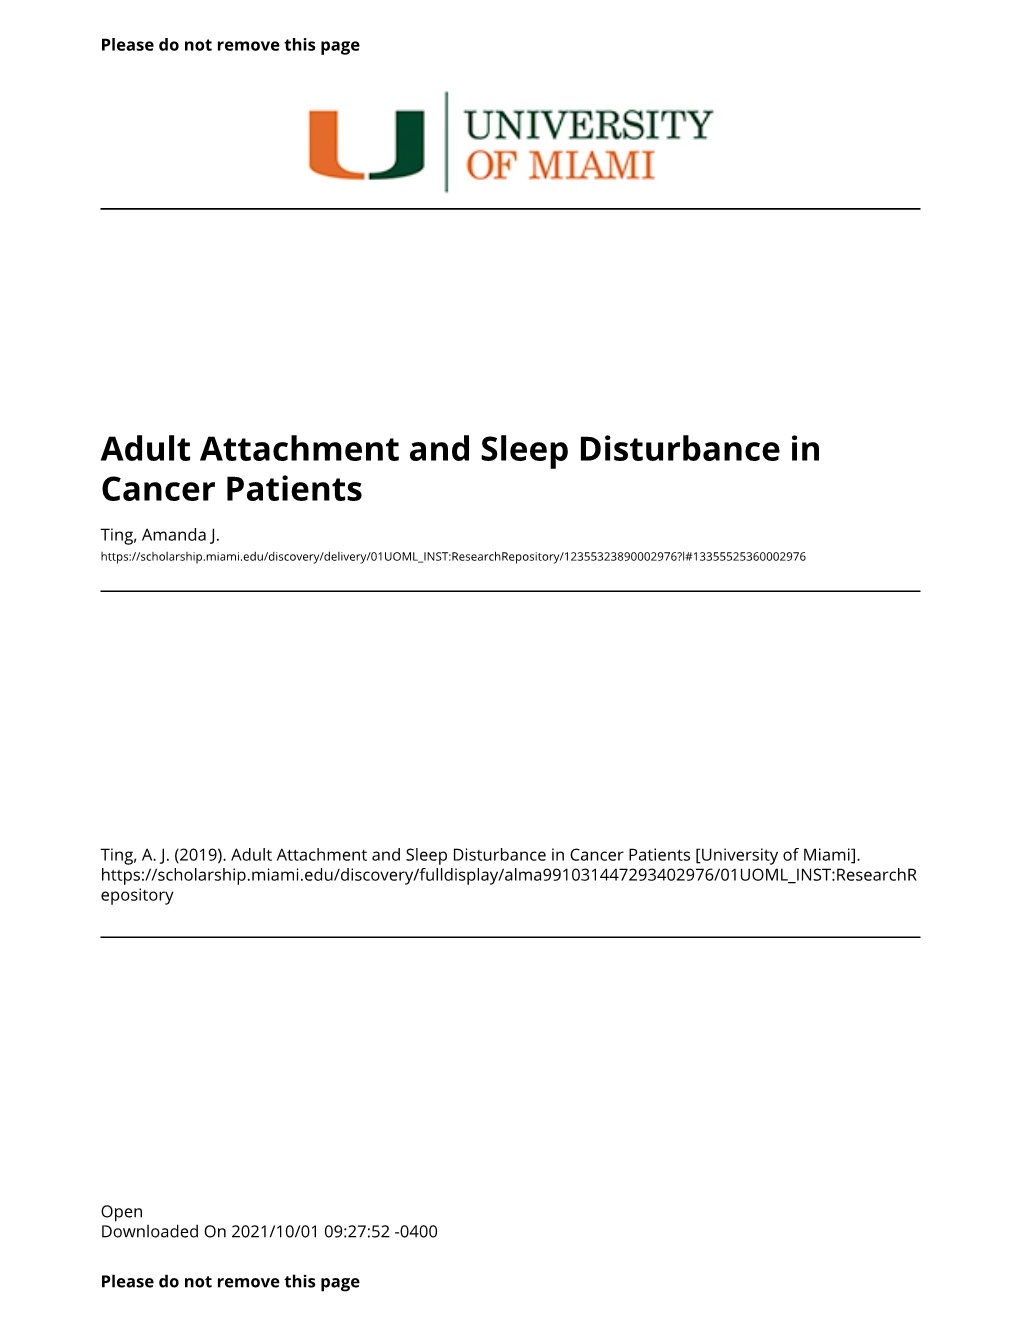 Adult Attachment and Sleep Disturbance in Cancer Patients